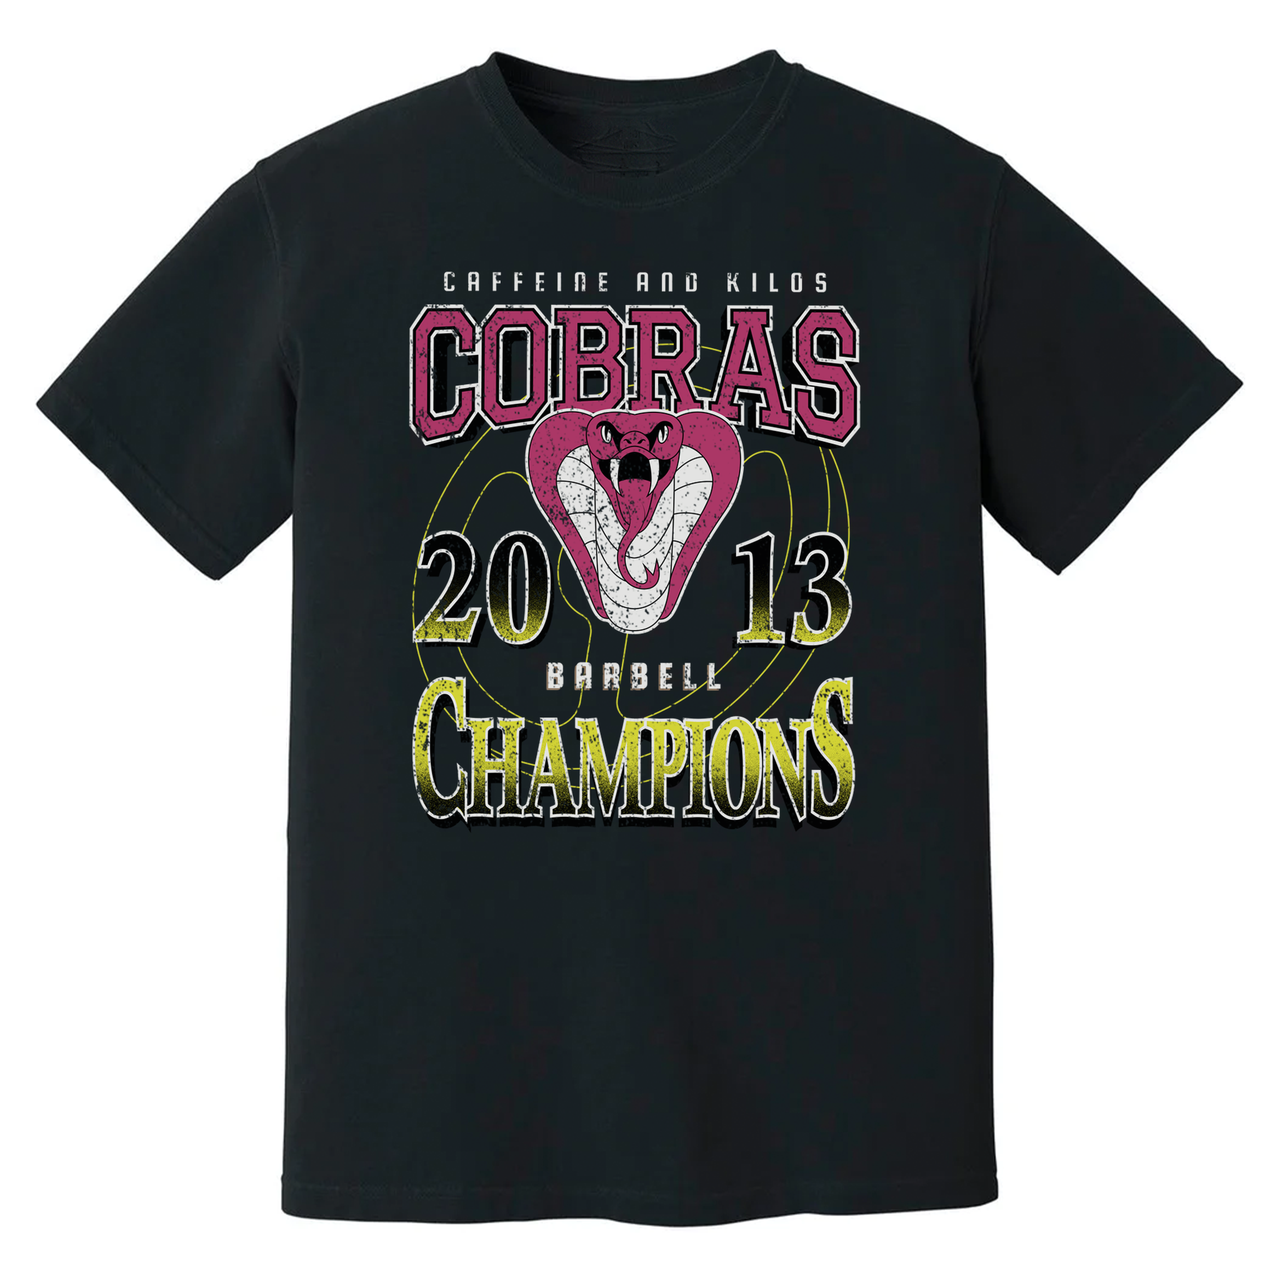 Champions Tee - Outlet